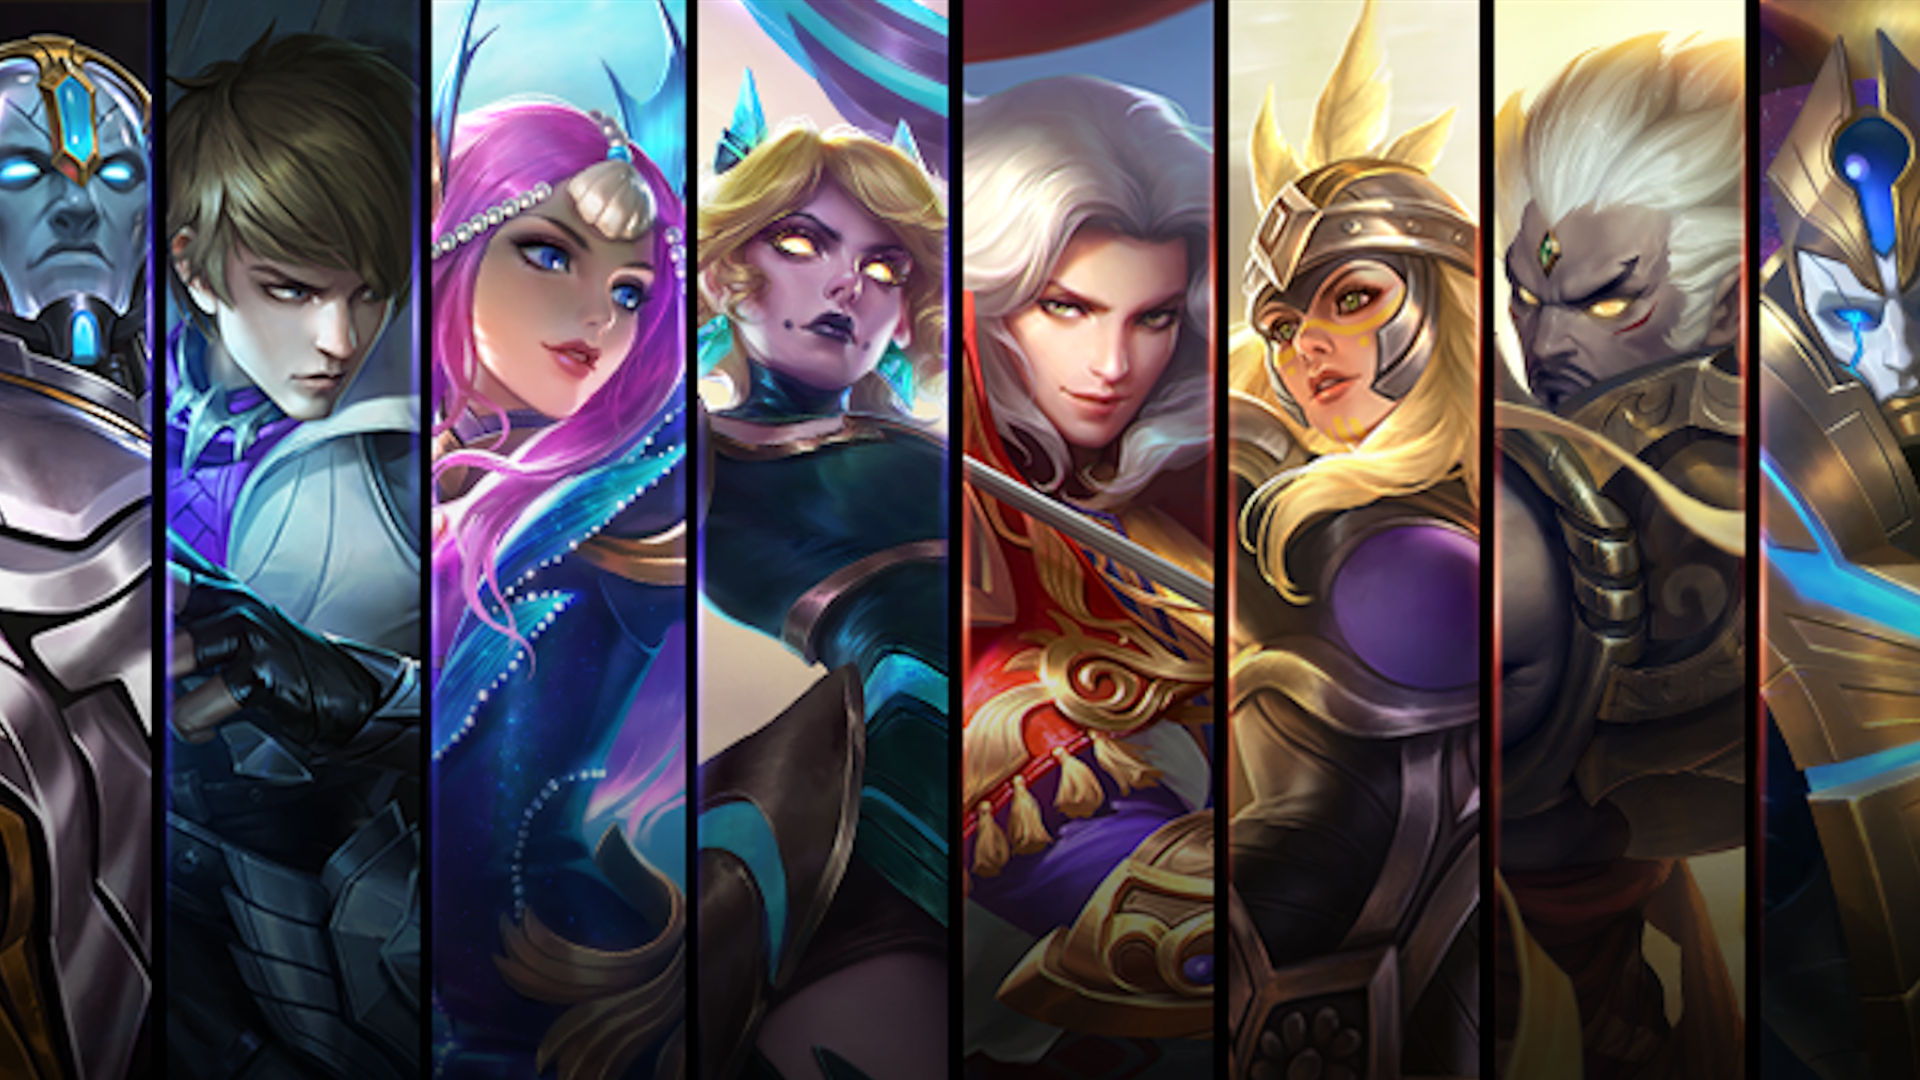 Mobile Legends free heroes weekly rotation